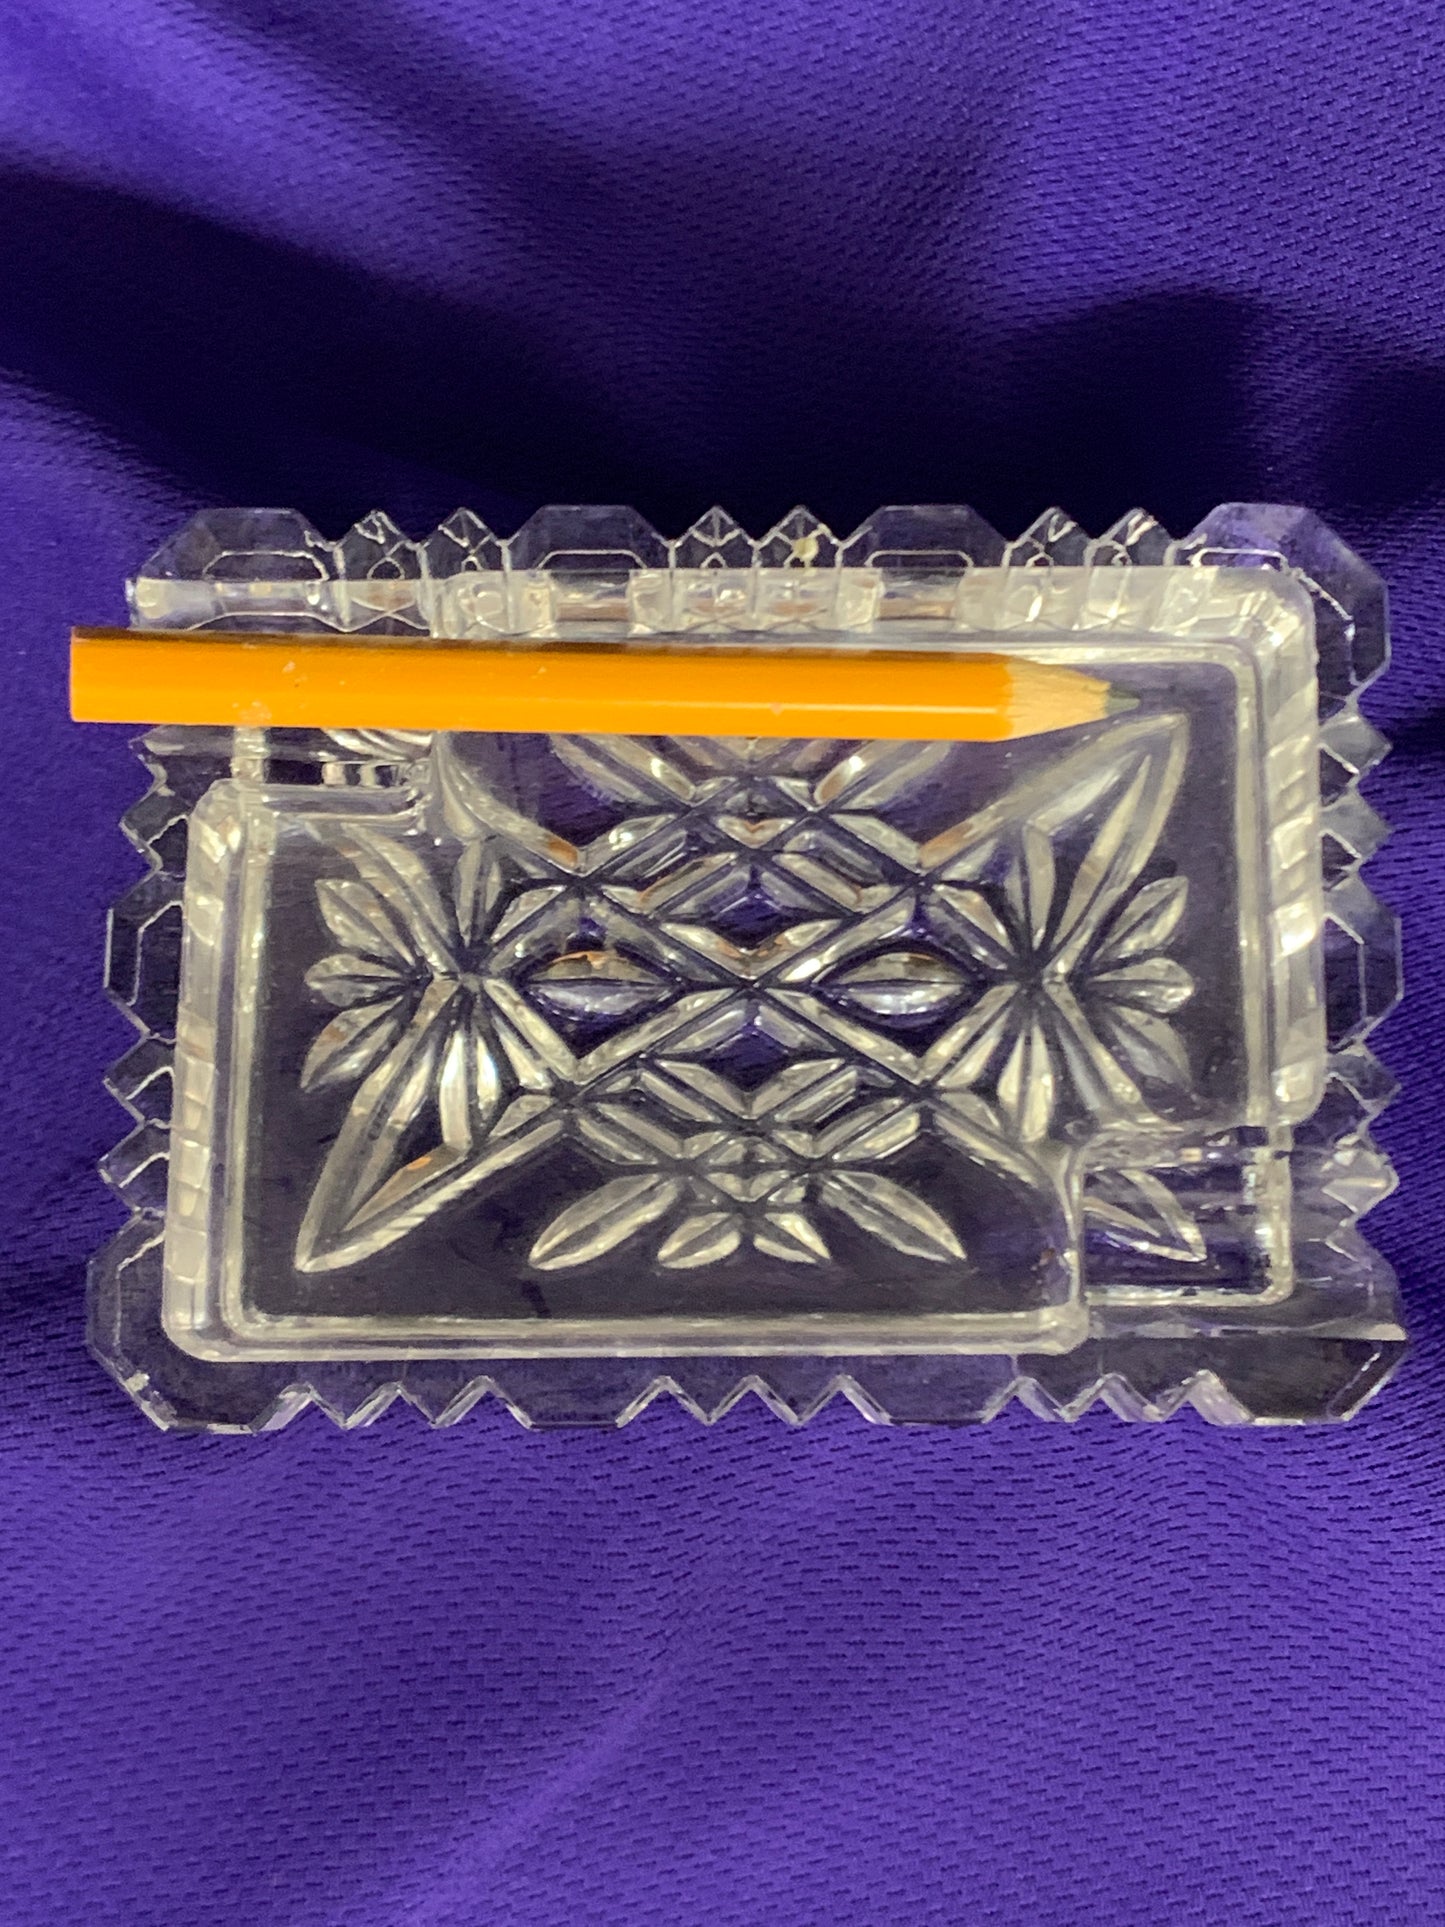 Cigarette "Casket" and Ashtray Lid Cut Crystal